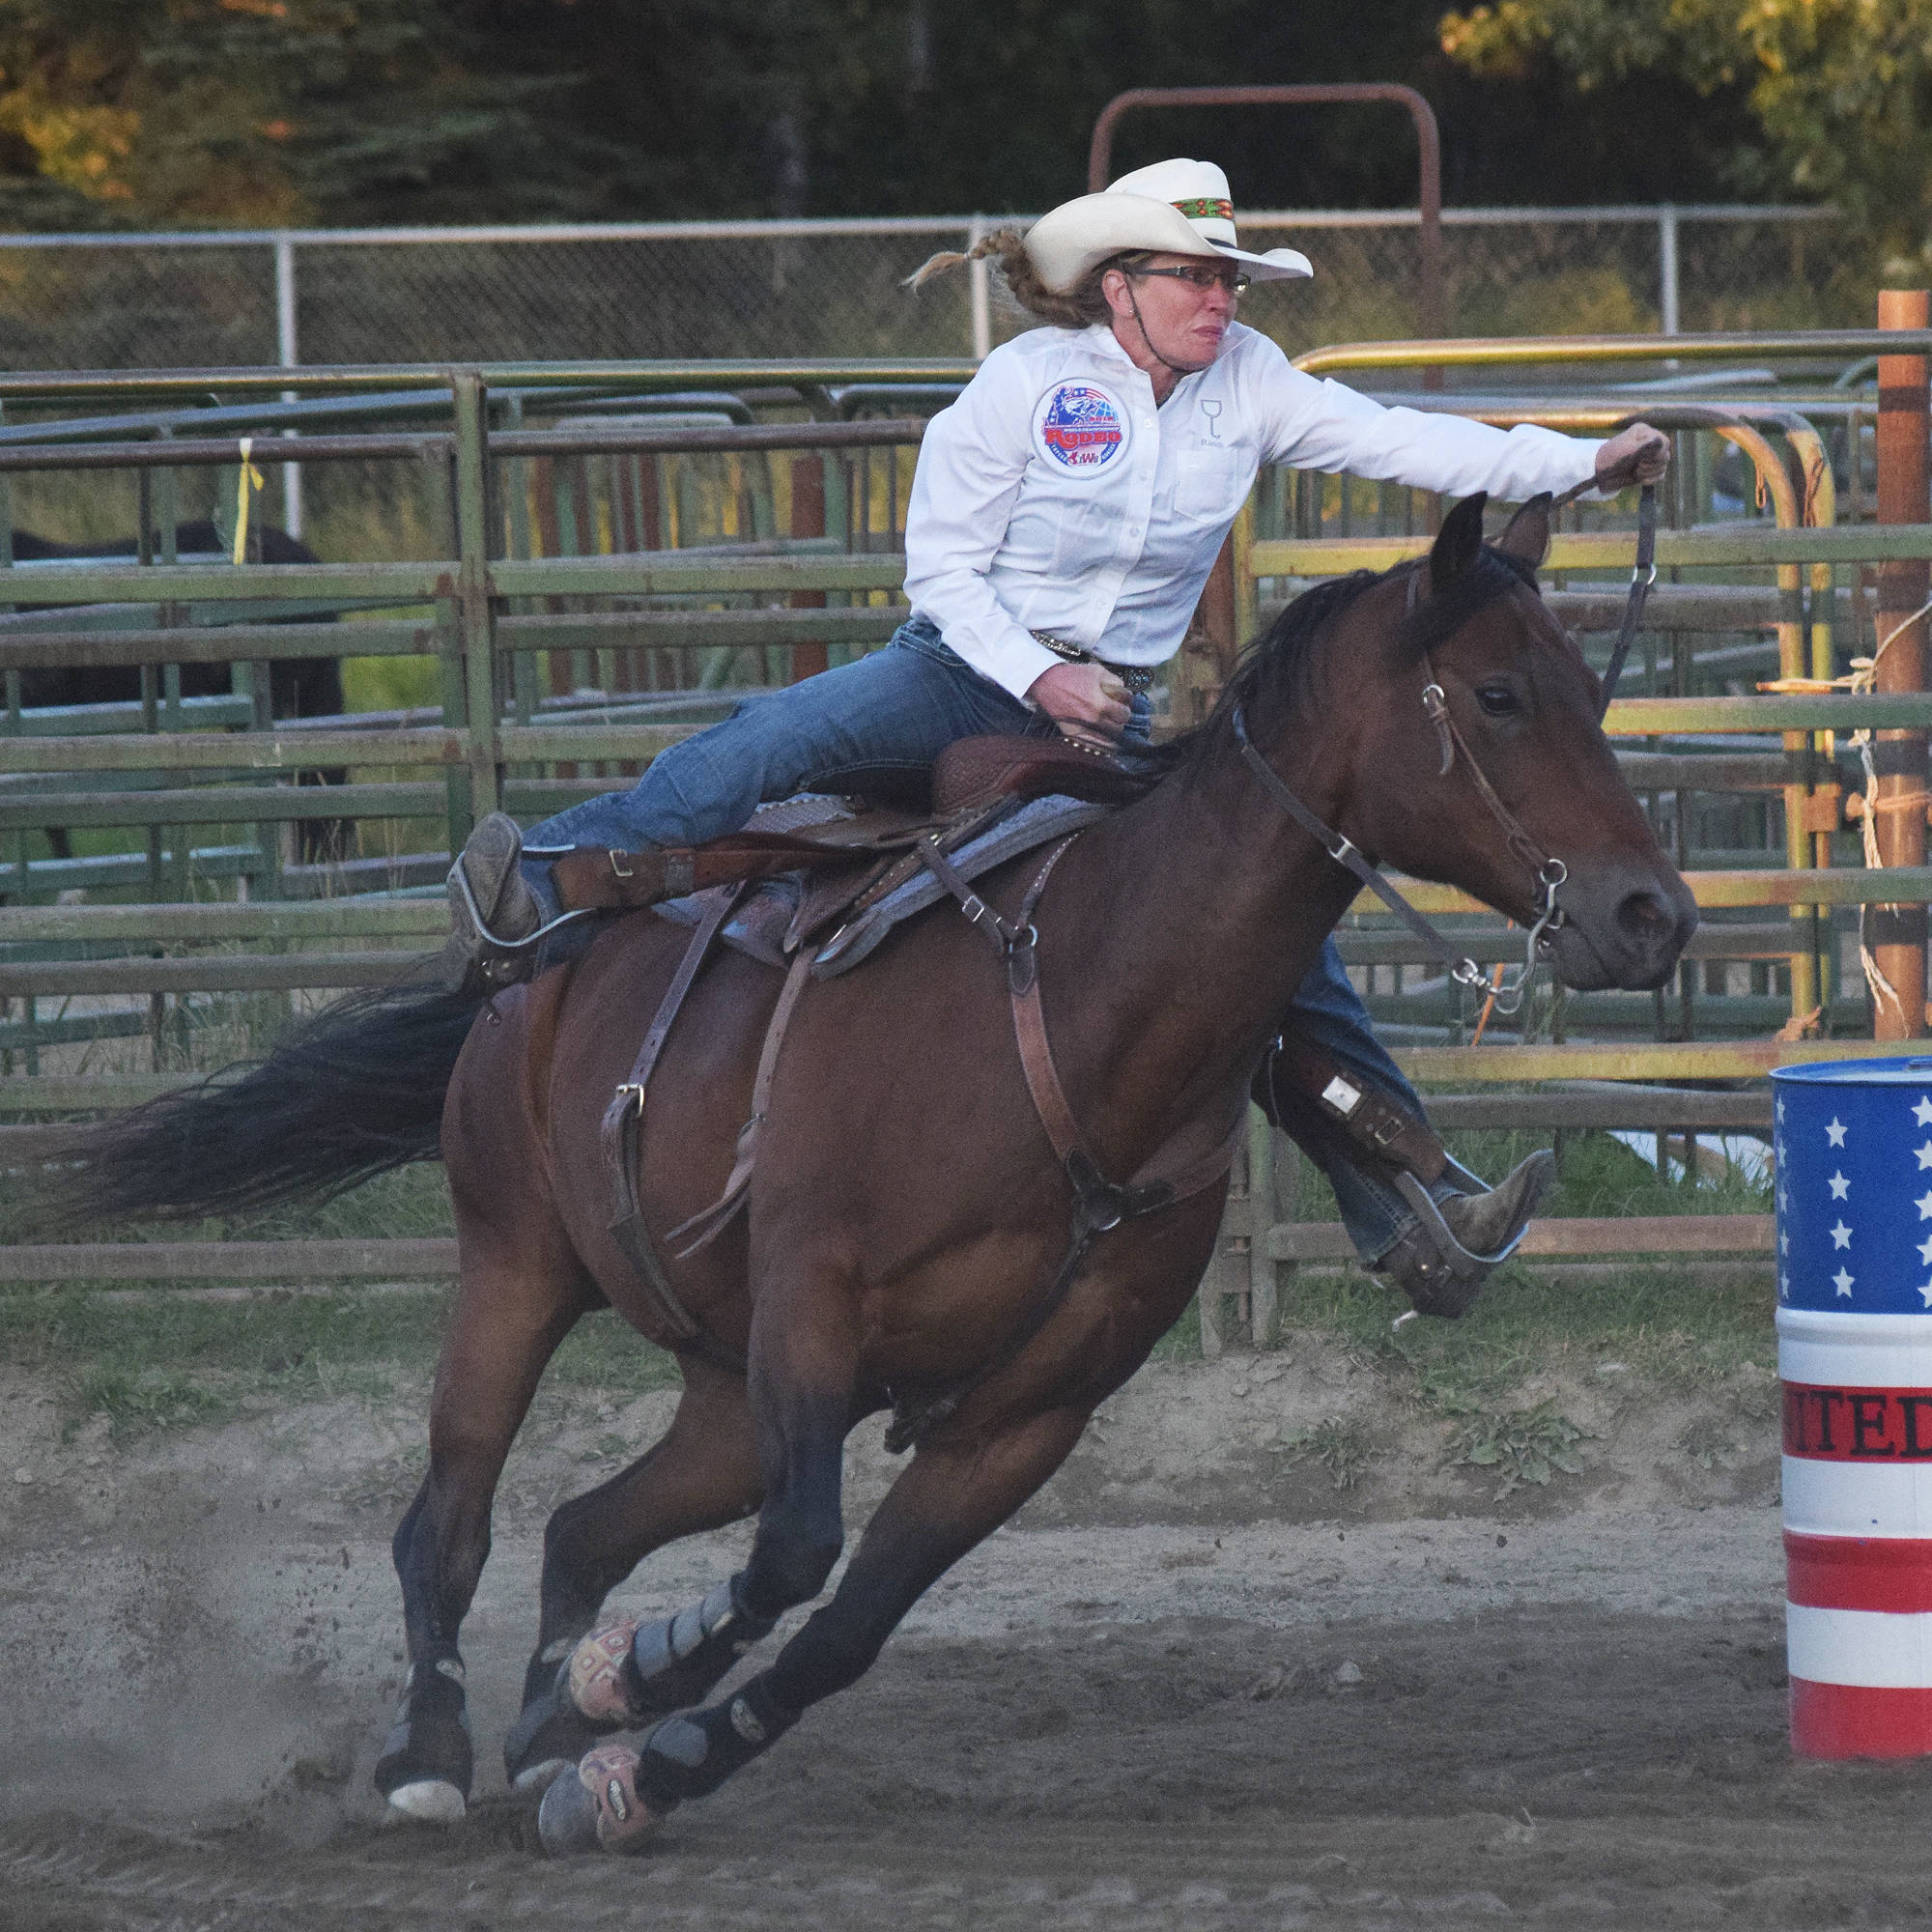 Karen Jensen spurs her horse on during the barrel racing event Saturday at the 9/11 Tribute Rodeo at the Soldotna Rodeo Grounds. (Photo by Joey Klecka/Peninsula Clarion)